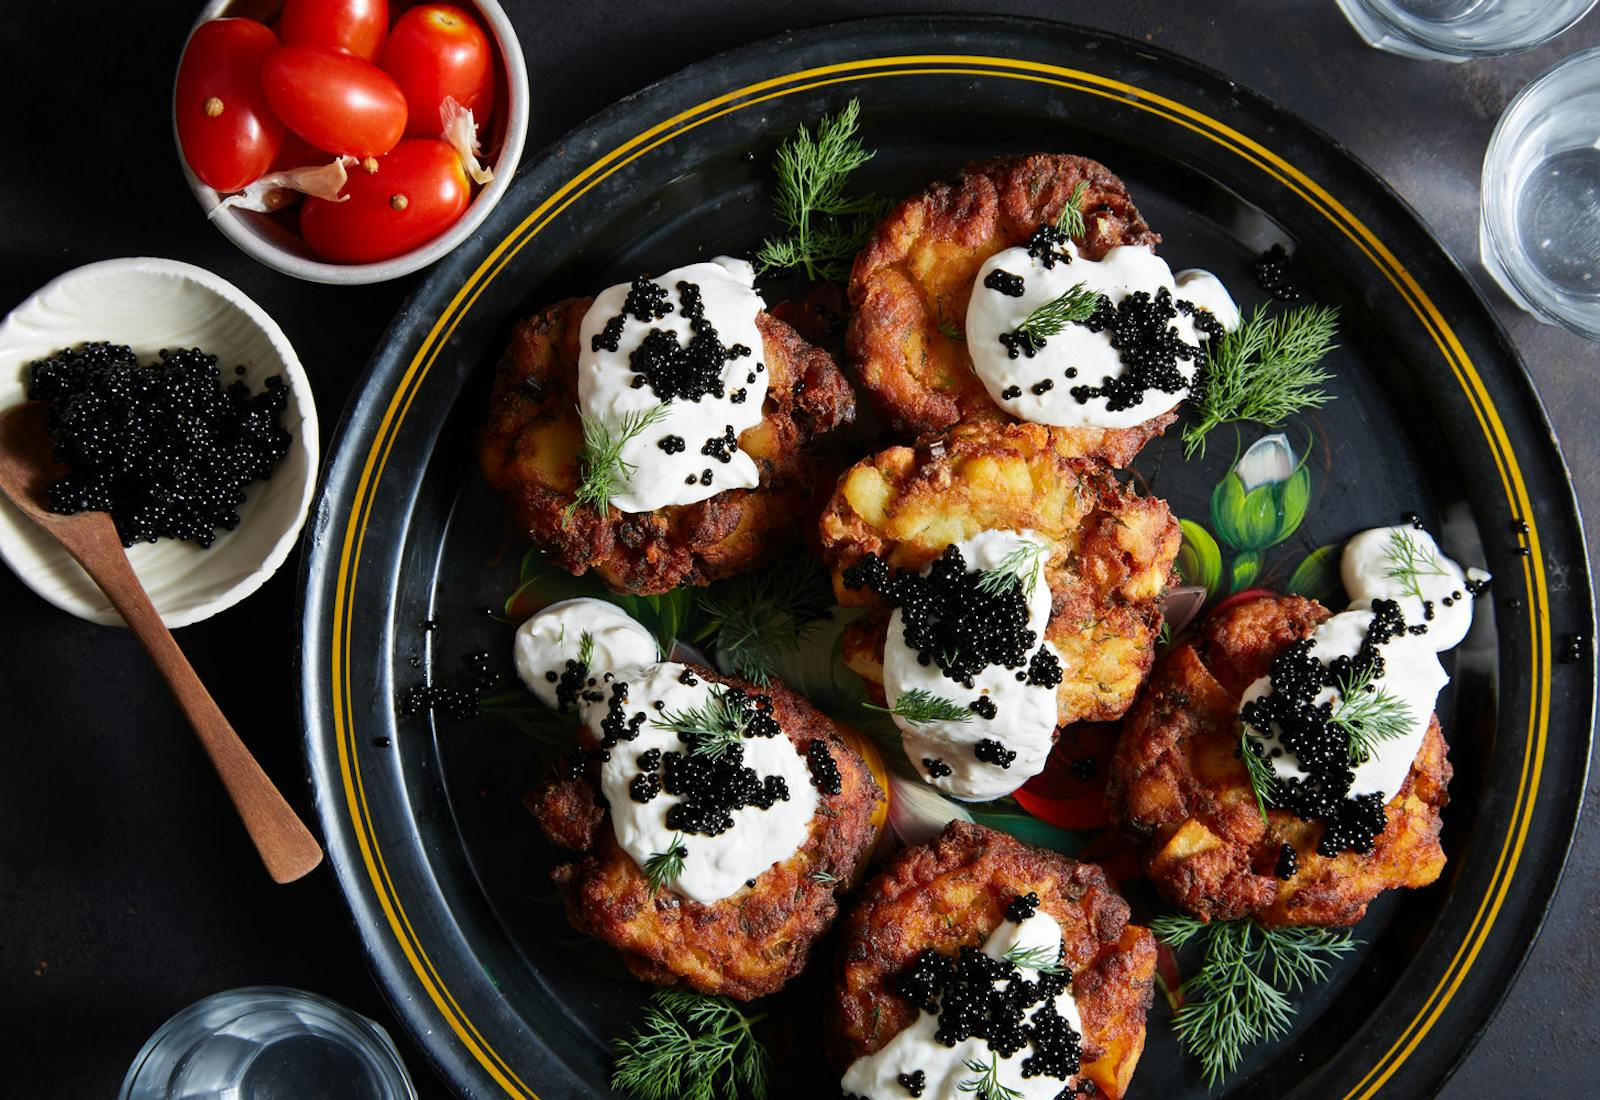 White fish and potato latkes with dollops of horseradish sour cream and black caviar, garnished with dill. Alongside bowls of cherry tomatoes and caviar atop black surface. 